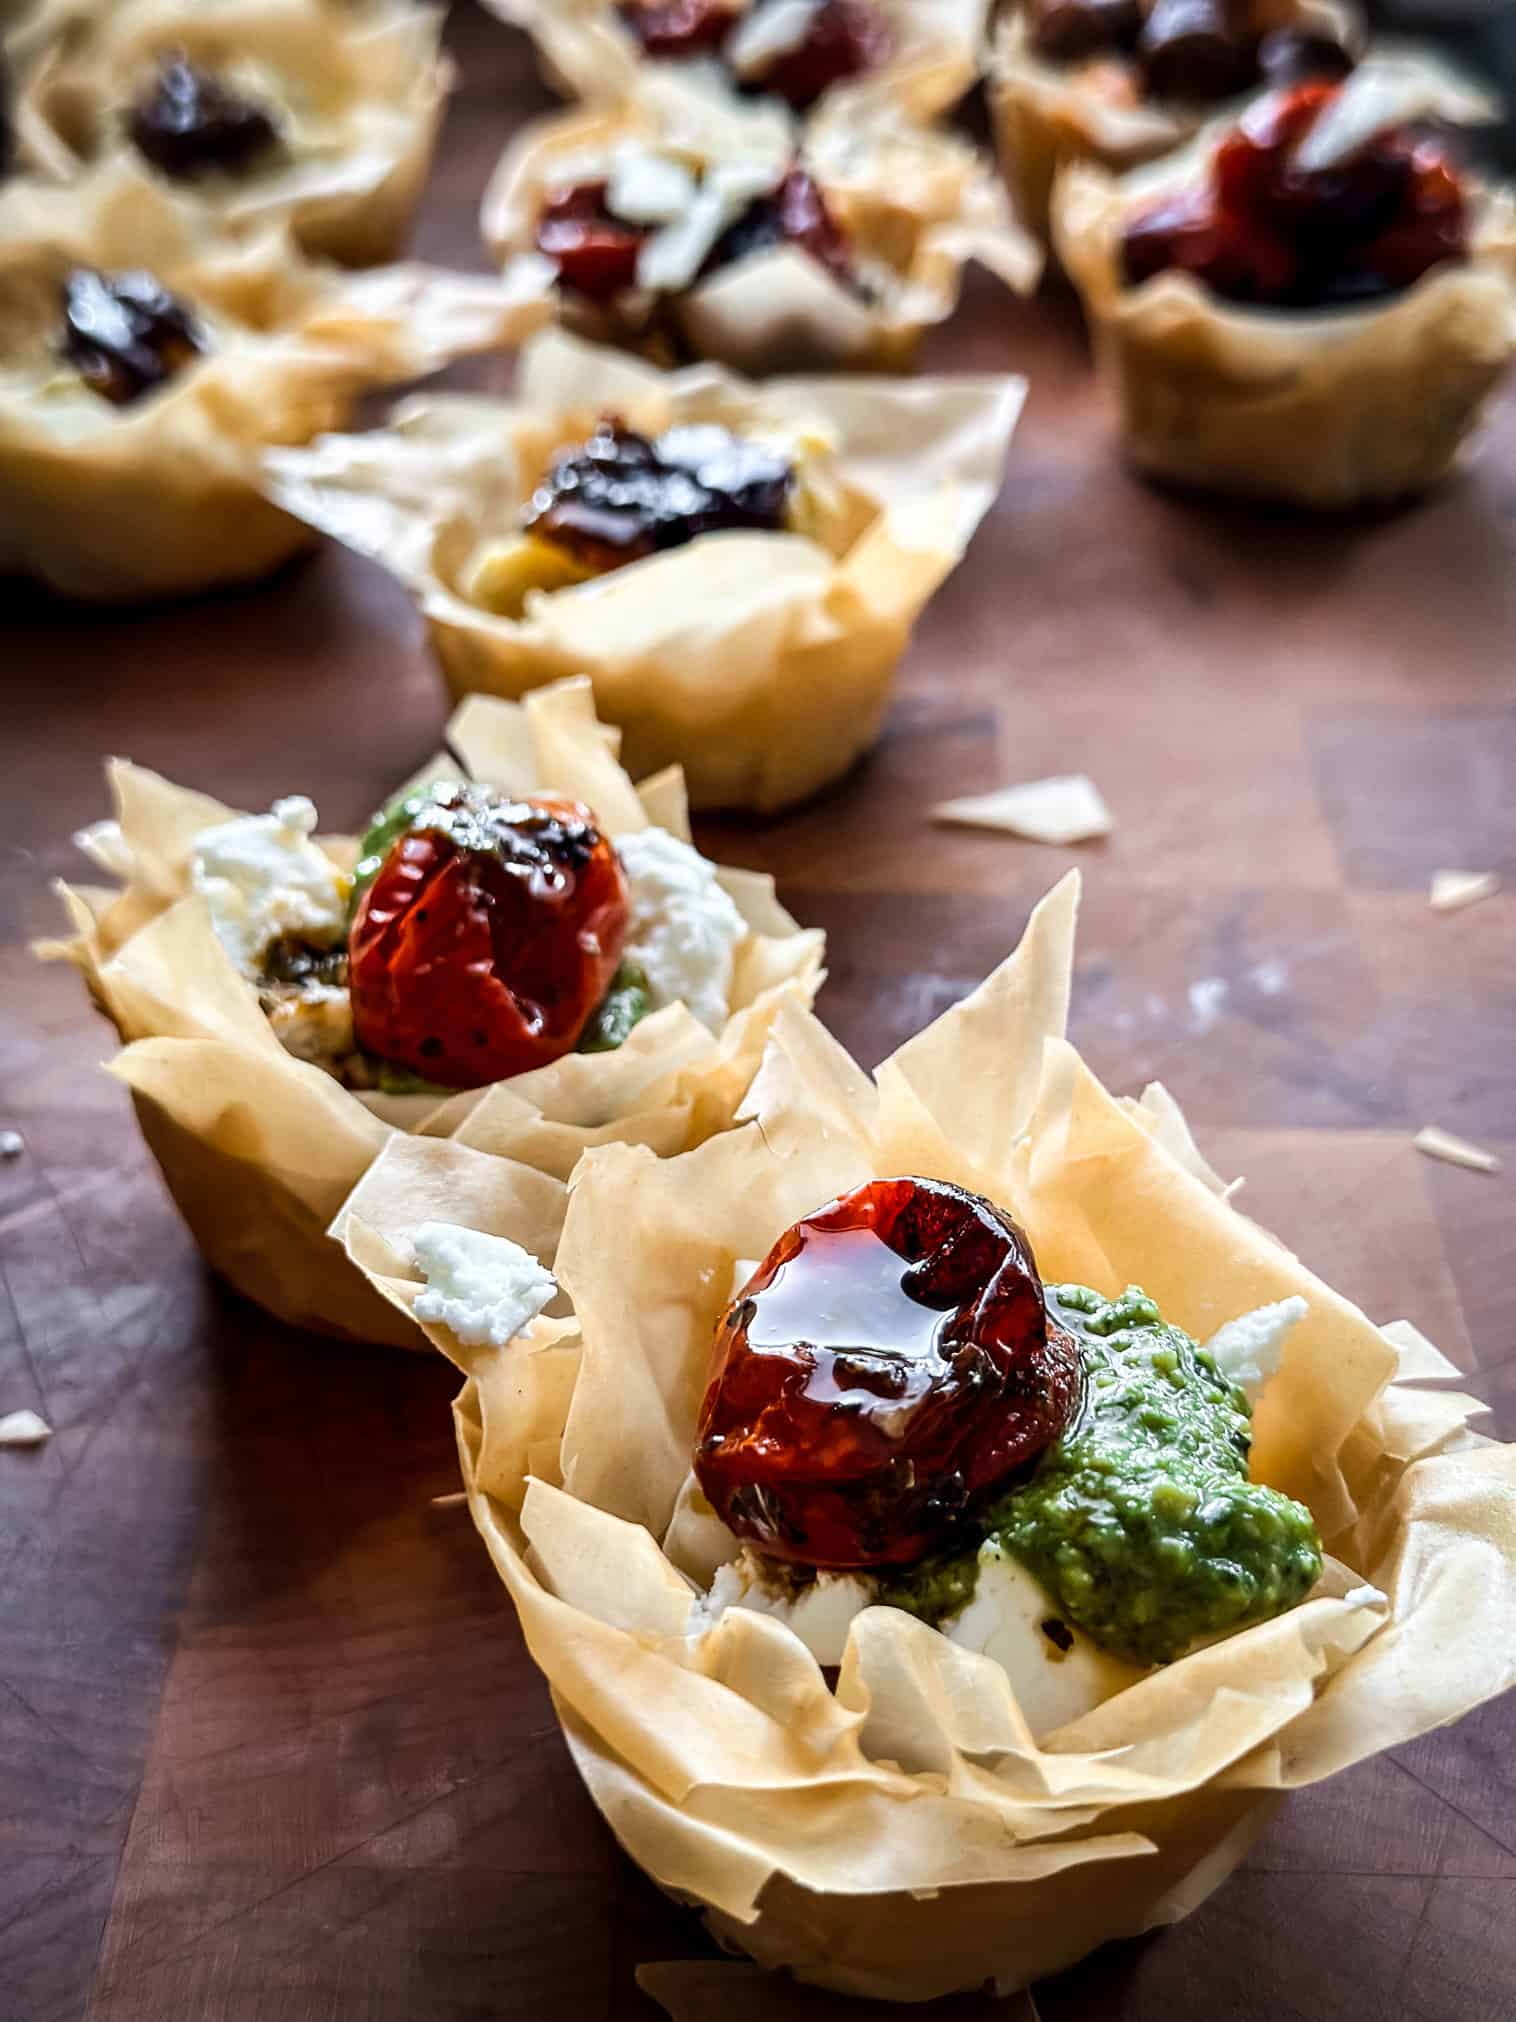 A phyllo cup appetizer with tomato and pesto.